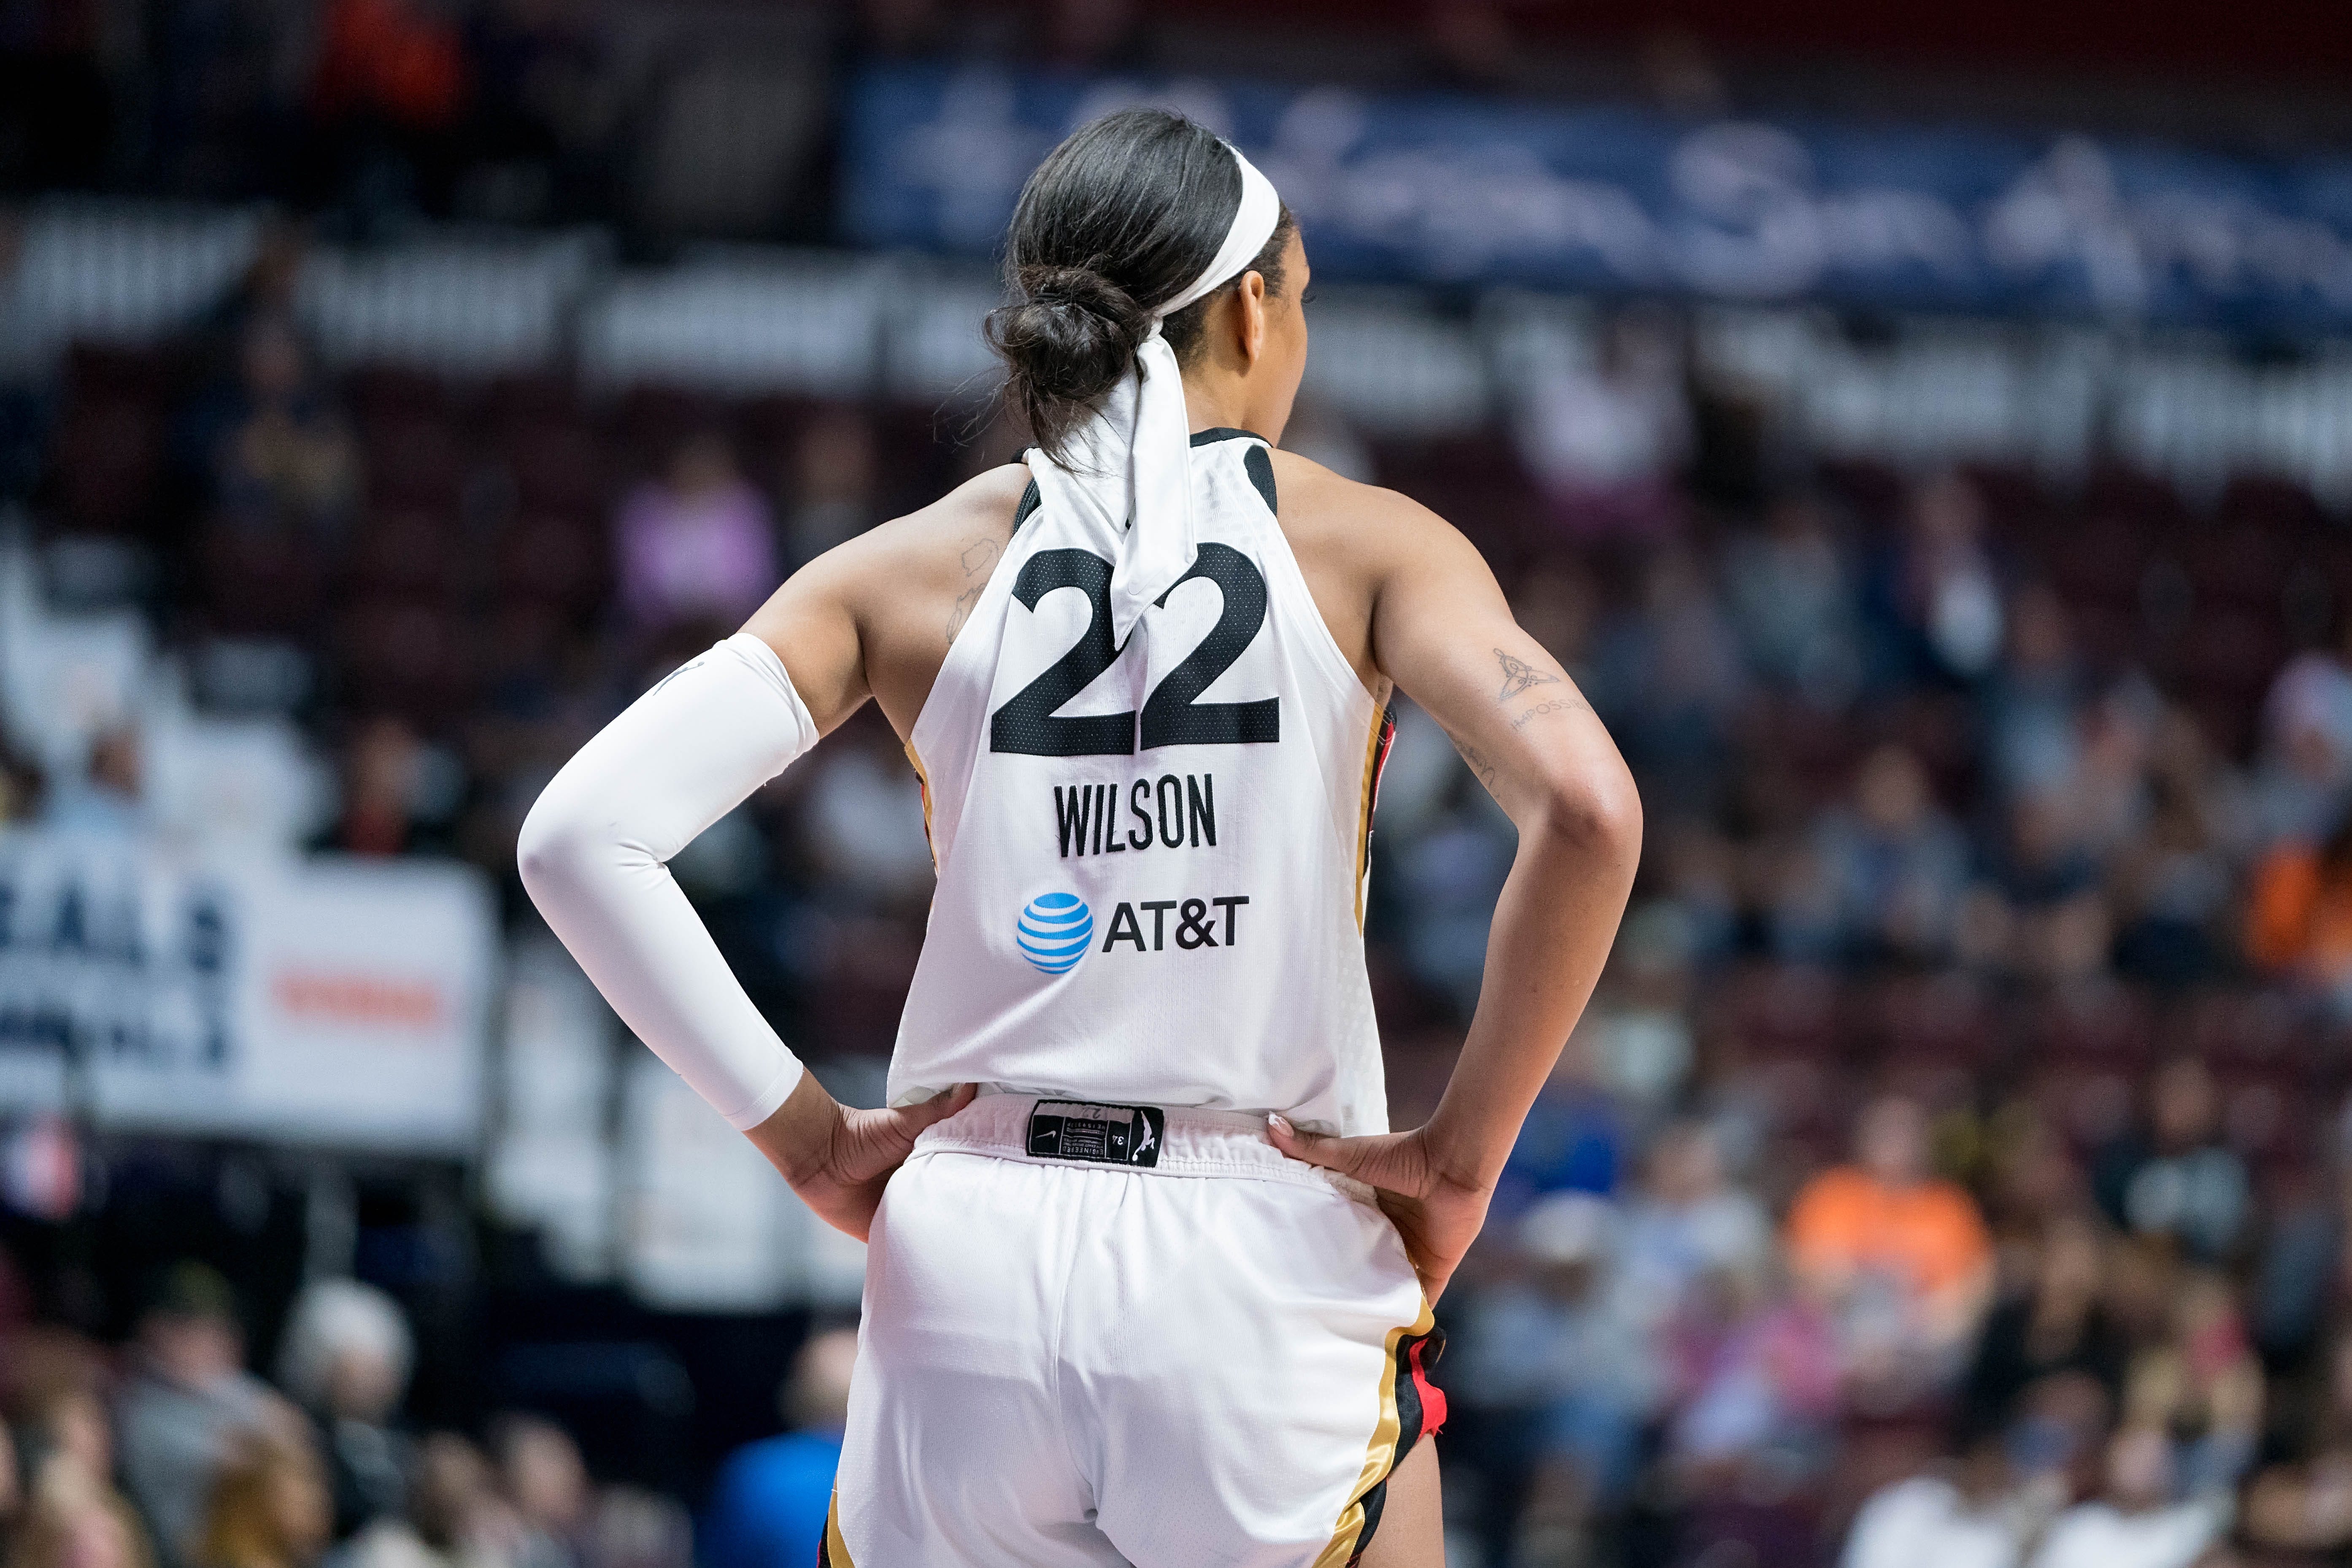 Candace Parker: Las Vegas Aces 'met all my needs' - Just Women's